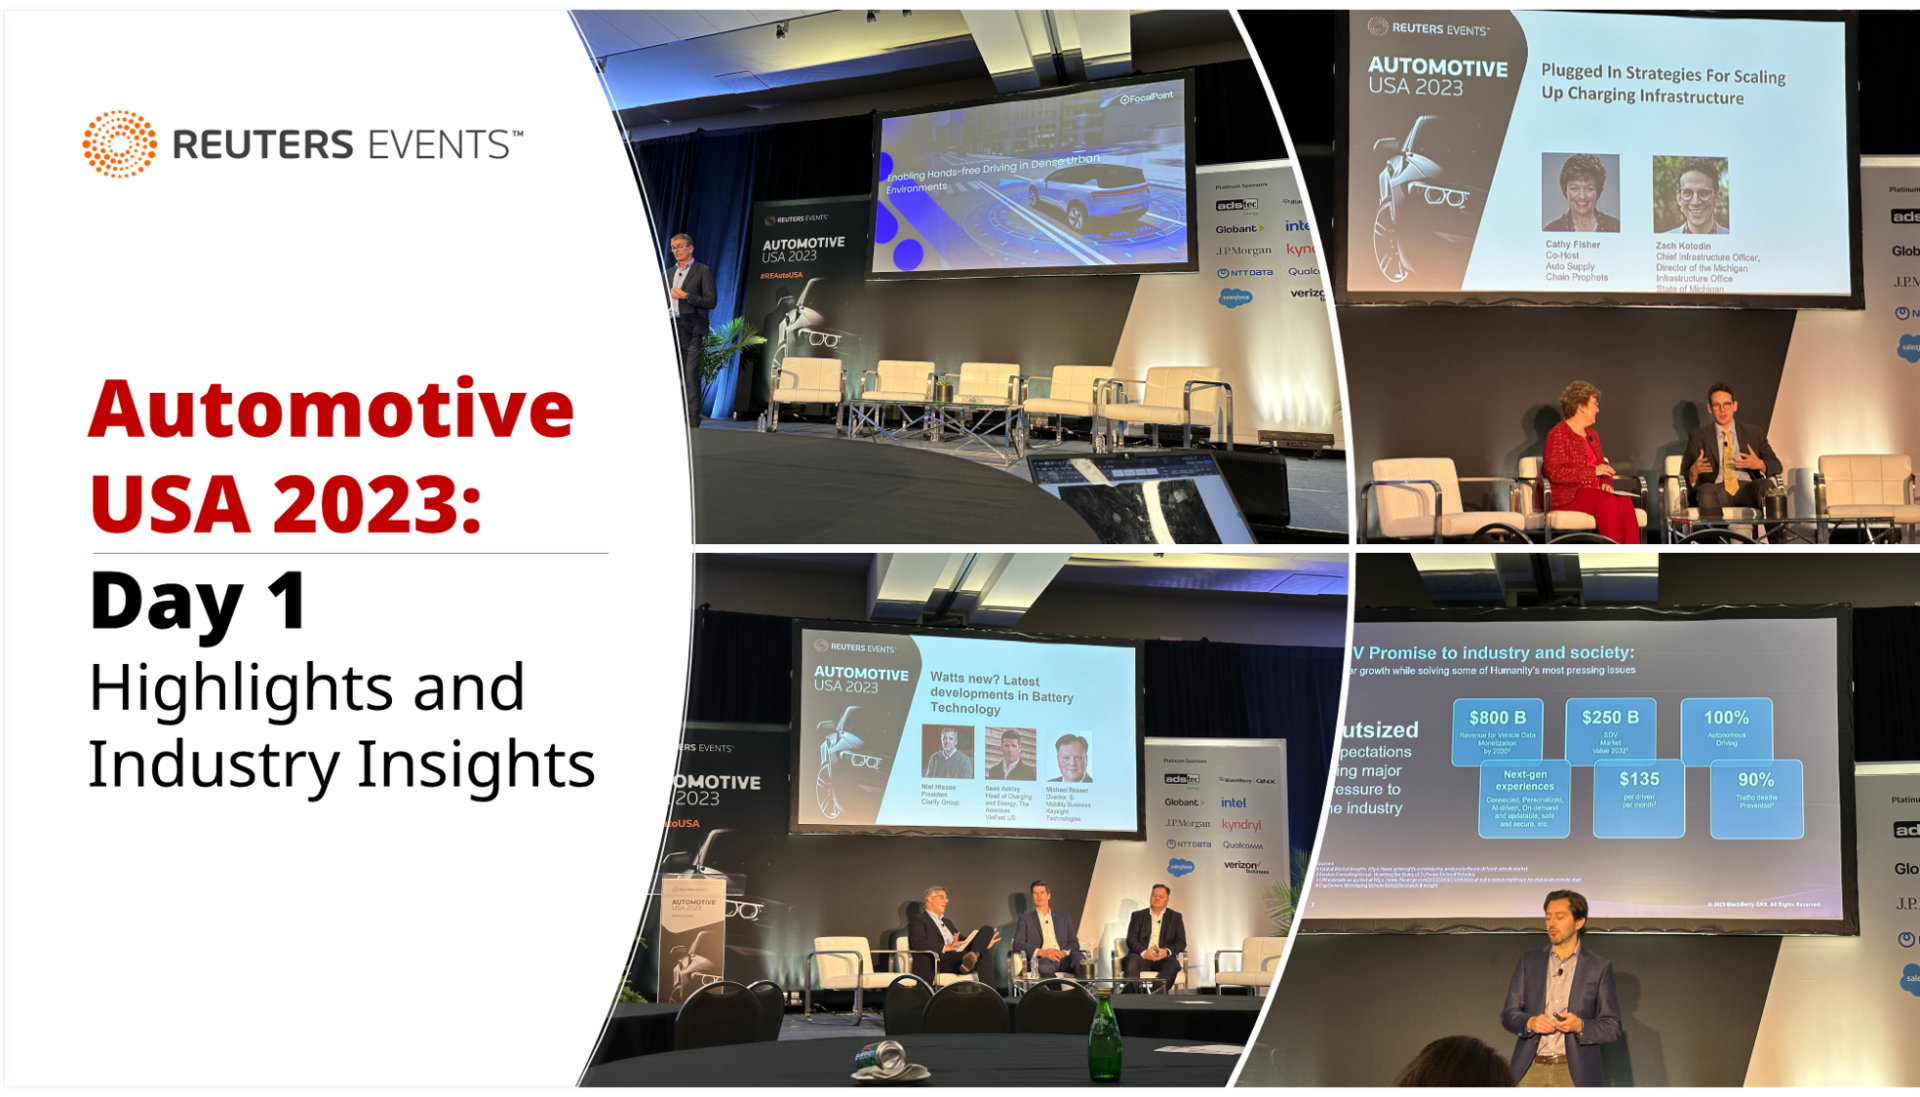 Automotive USA 2023: Day 1 Highlights and Industry Insights